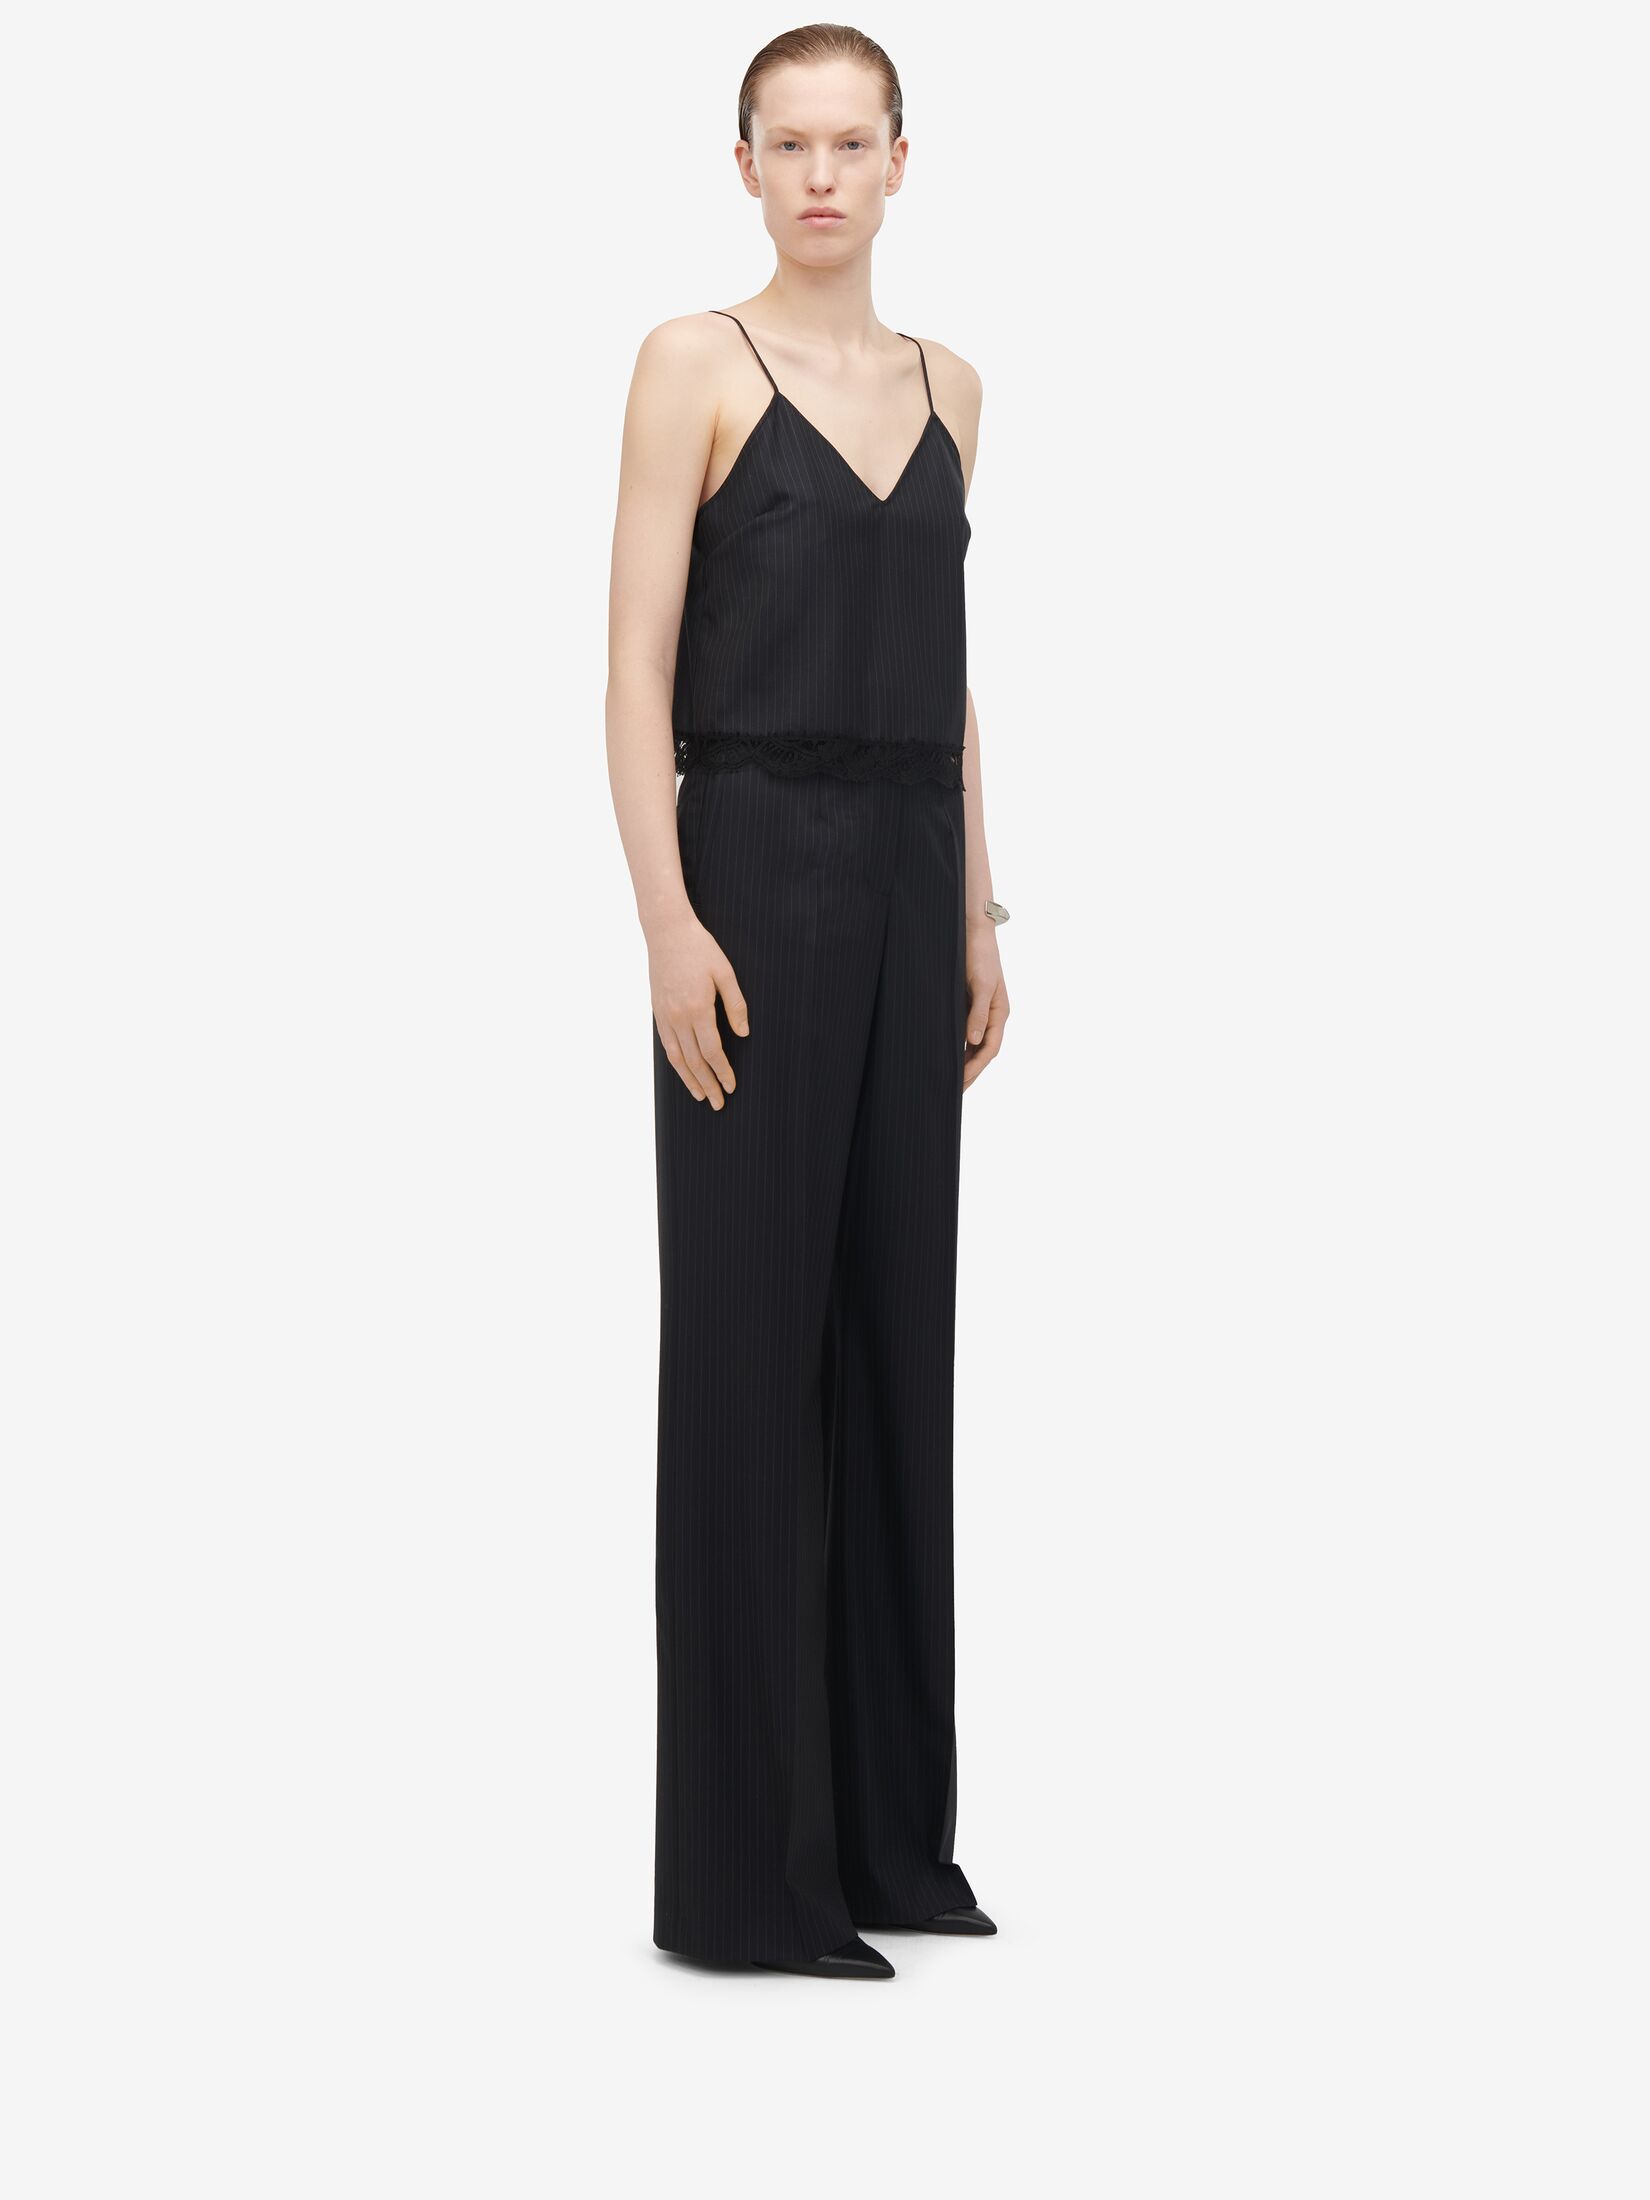 High-waisted Wide Leg Trousers